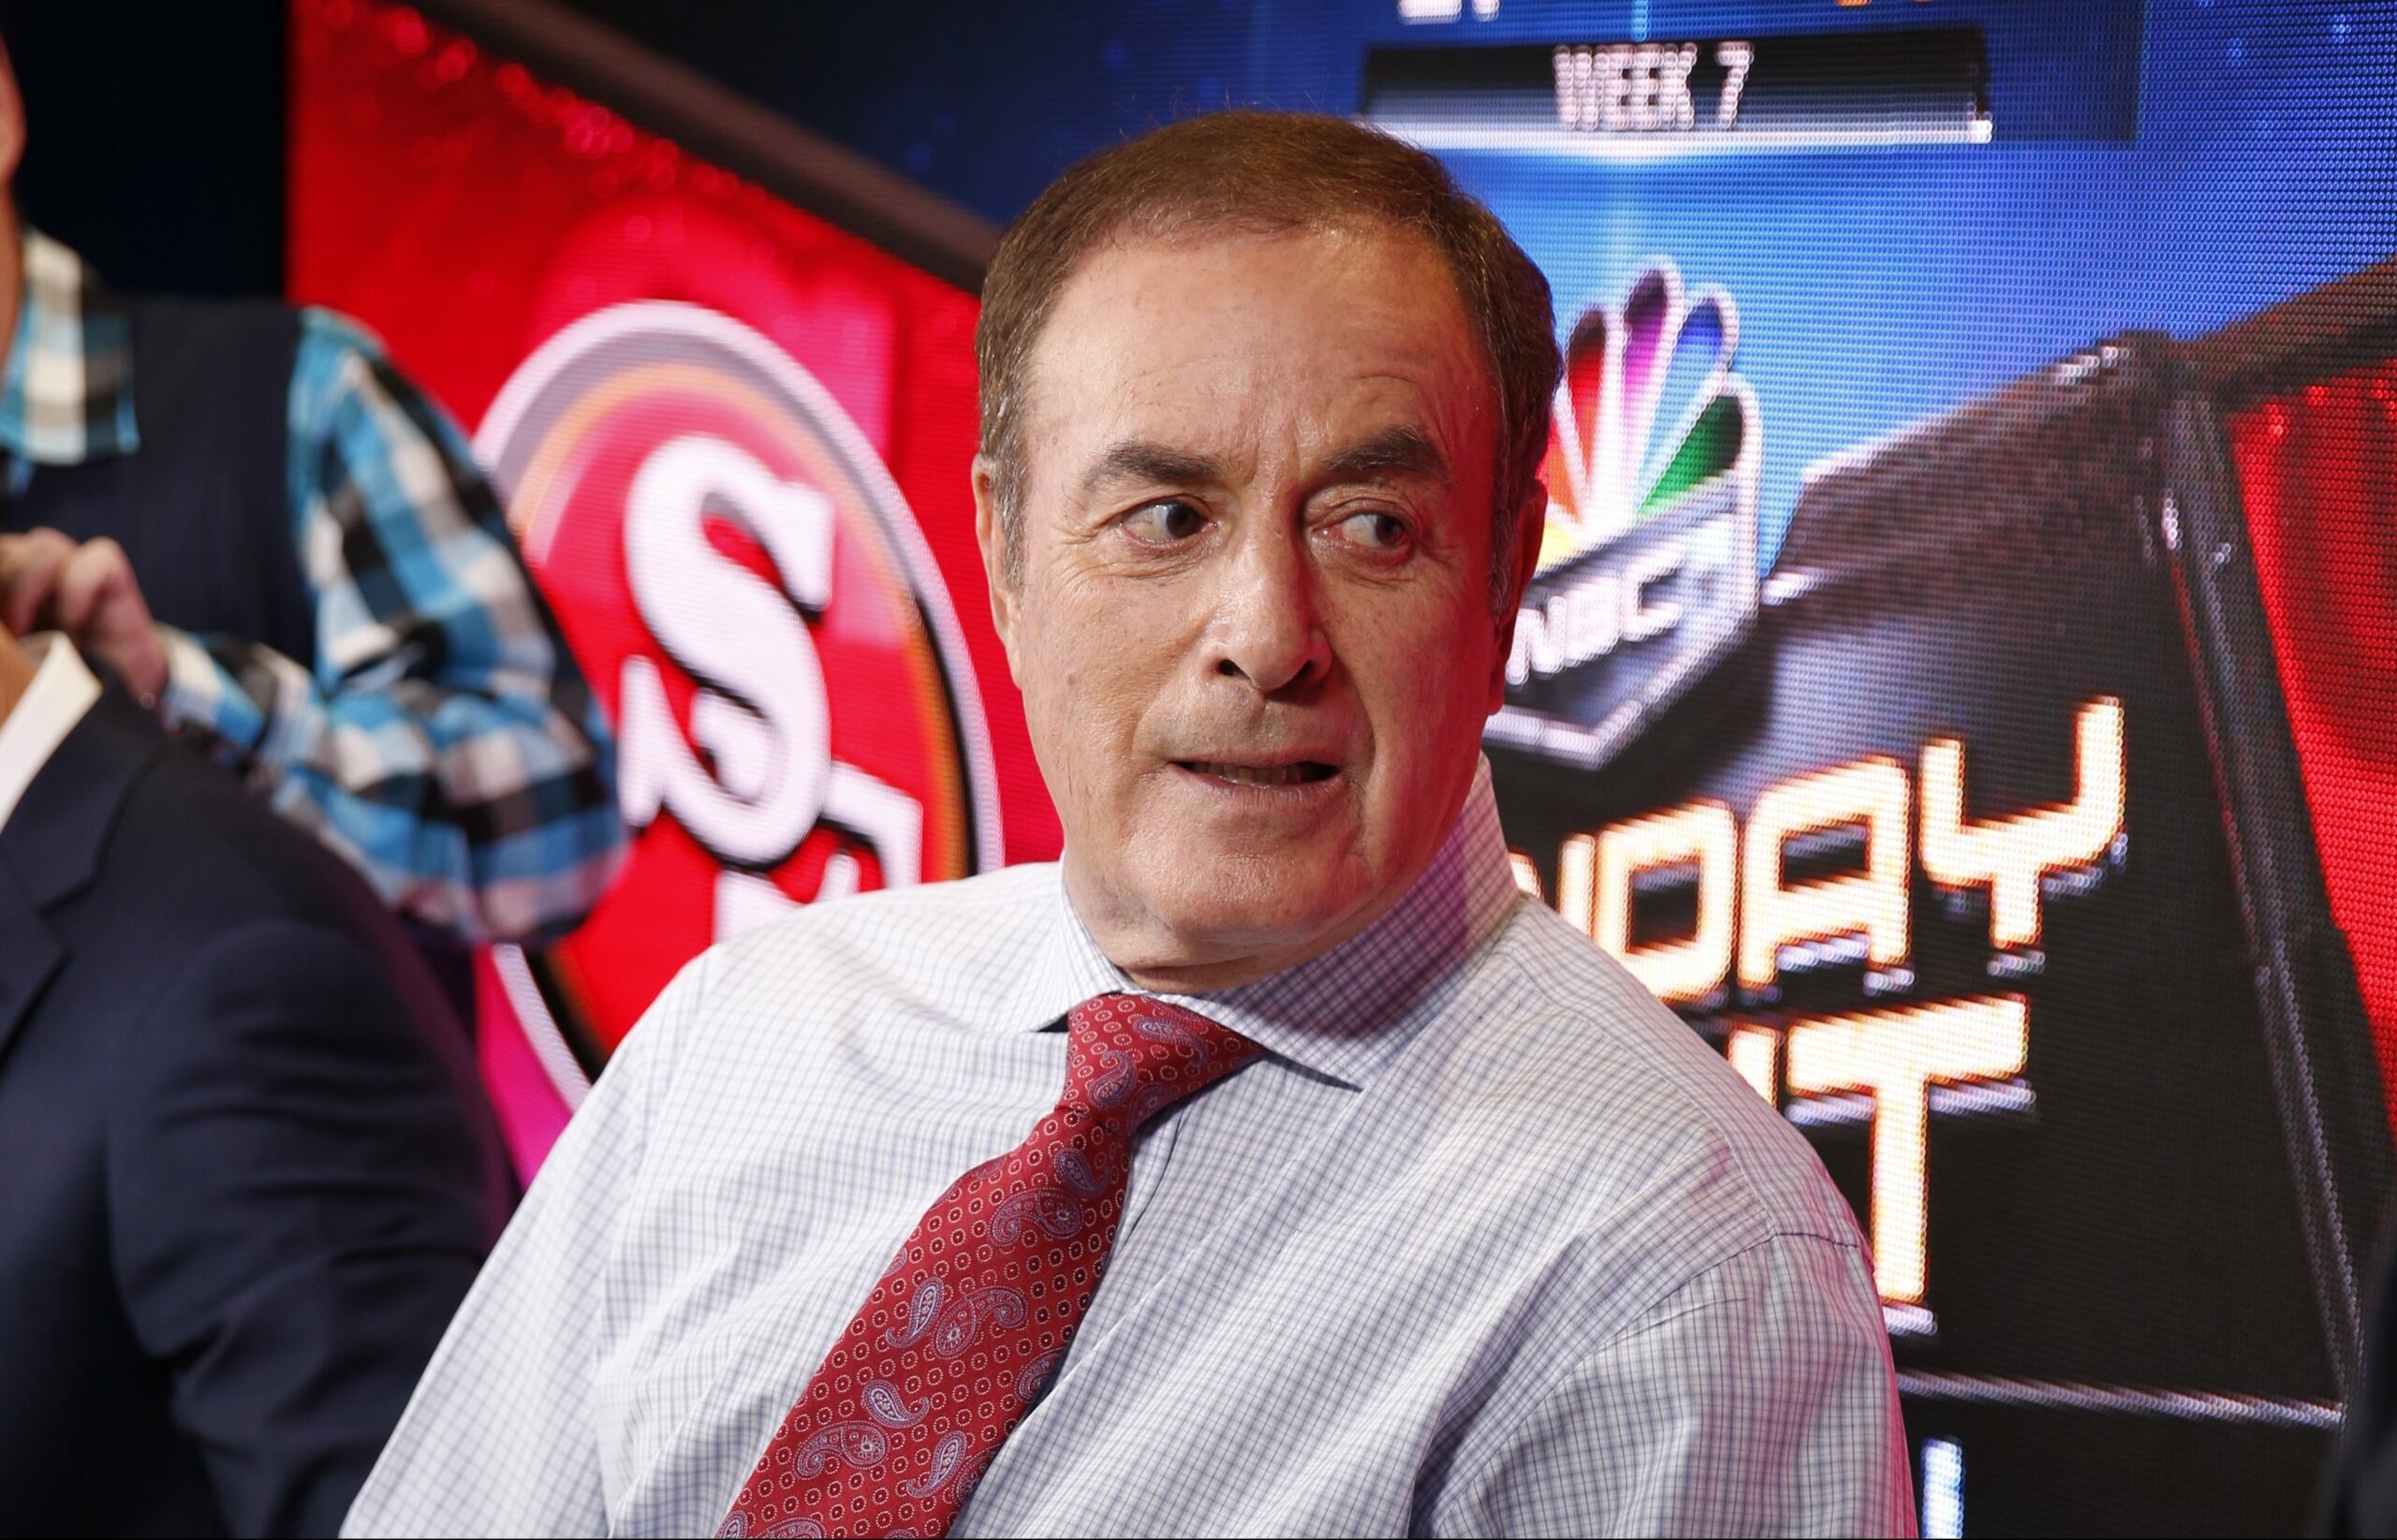 Al Michaels’ lack of enthusiasm on Thursday Night Football continues to be a problem for NFL fans